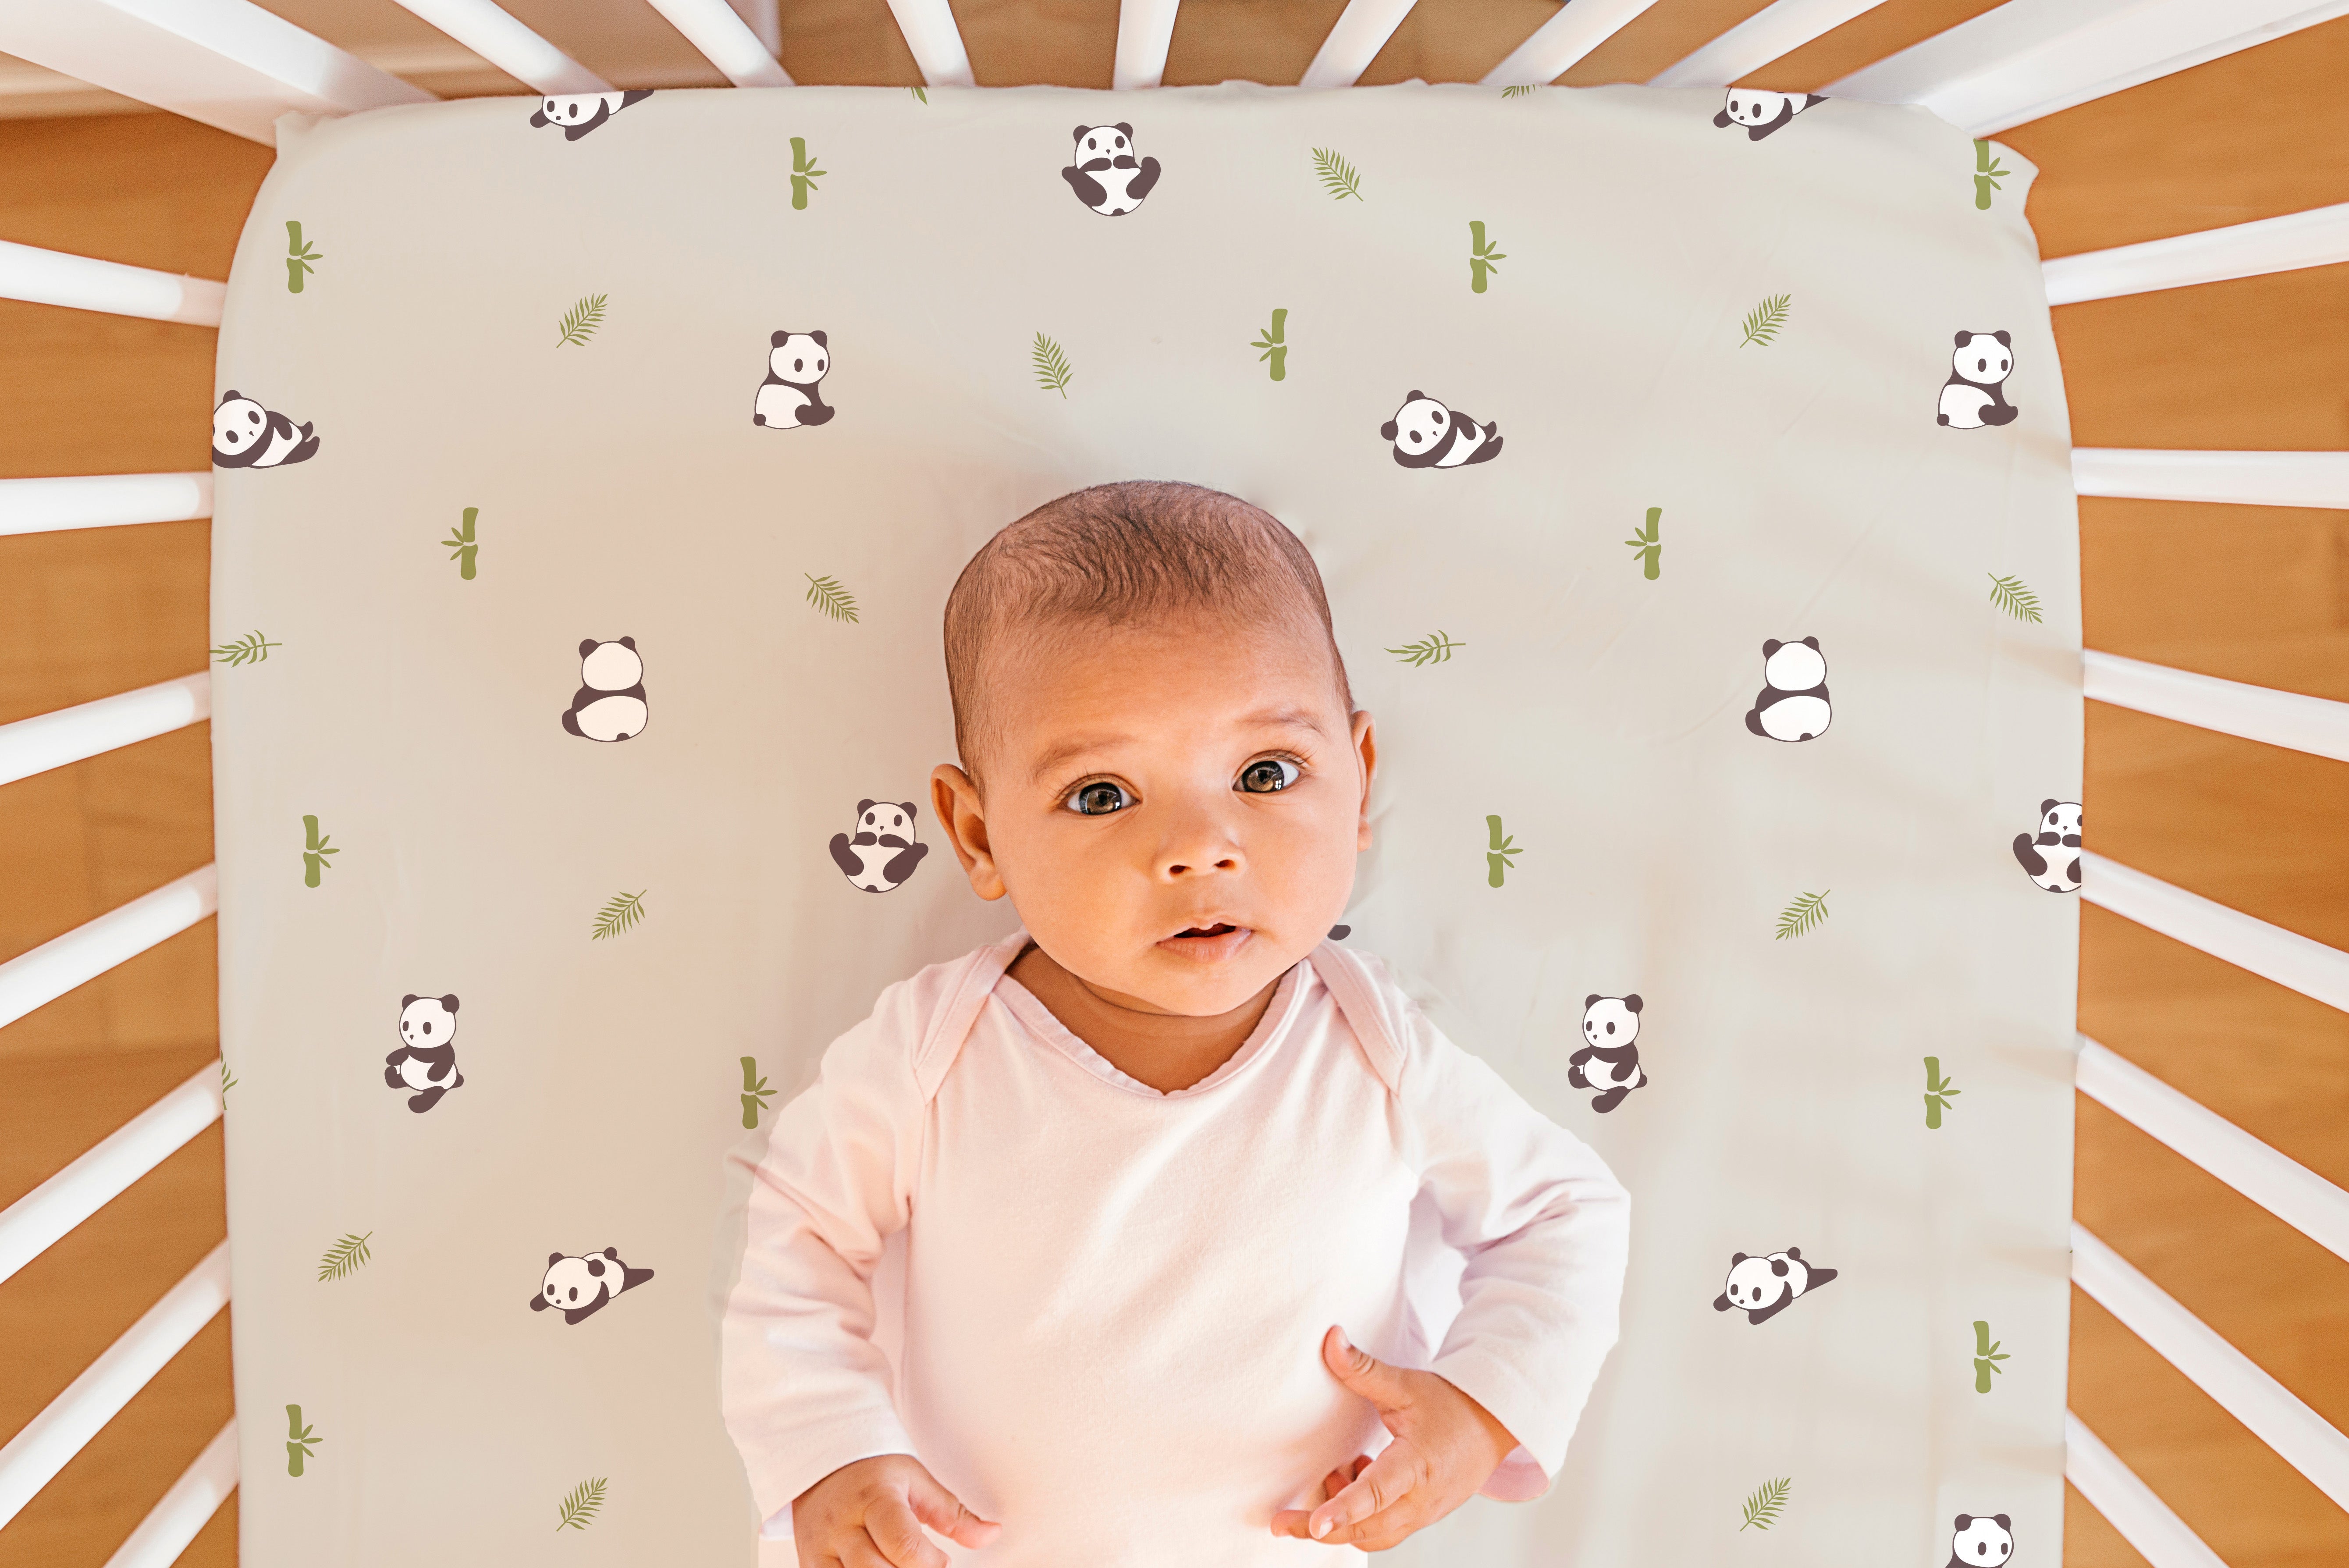 The White Cradle Pure Organic Cotton Fitted Cot Sheet for Baby Crib - Super Soft, Smooth, Absorbent, Twill Fabric for Infants, Newborns, Babies, Toddlers - Grey Panda